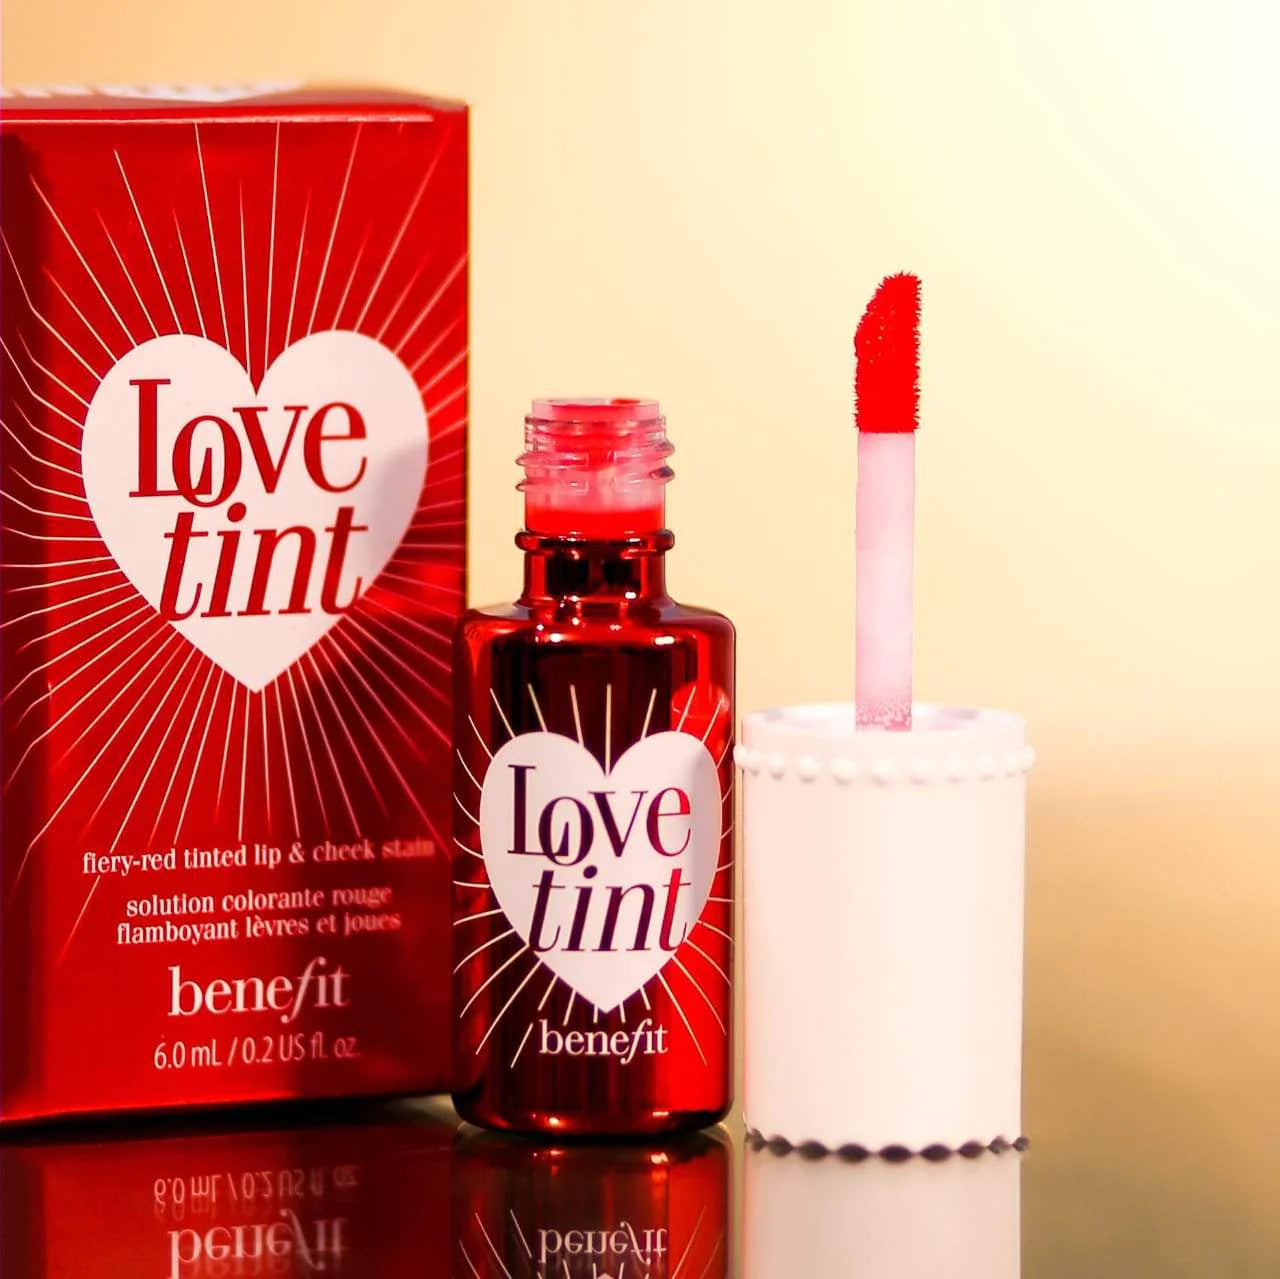 Love Tint Flery-red Tinted Lip & Cheek Stain